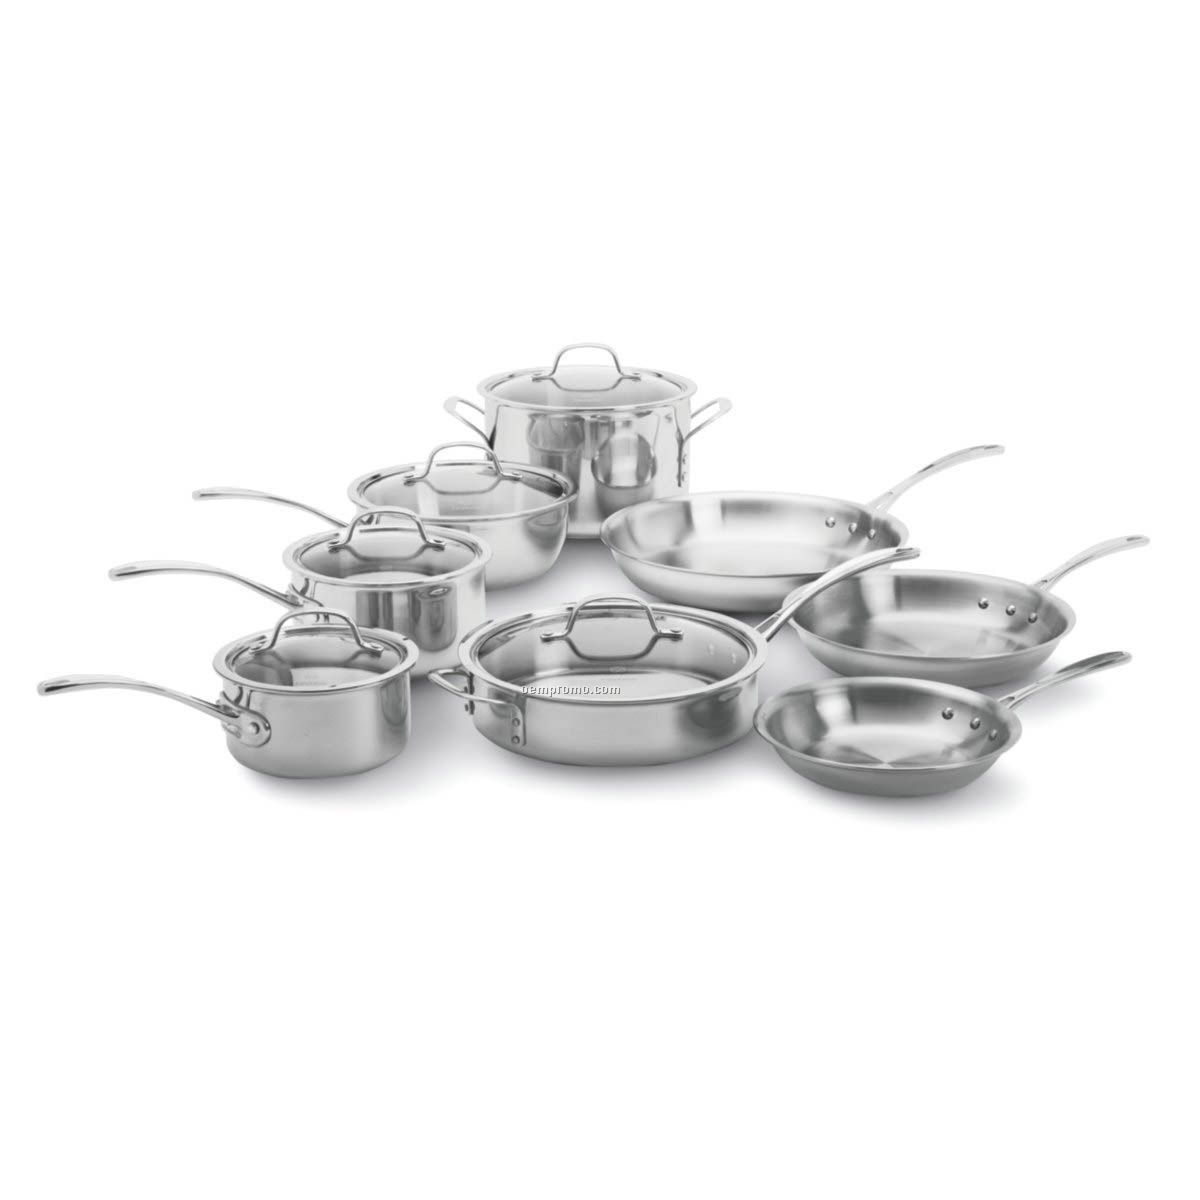 Calphalon 13pc. Tri-ply Stainless Steel Cookware Set